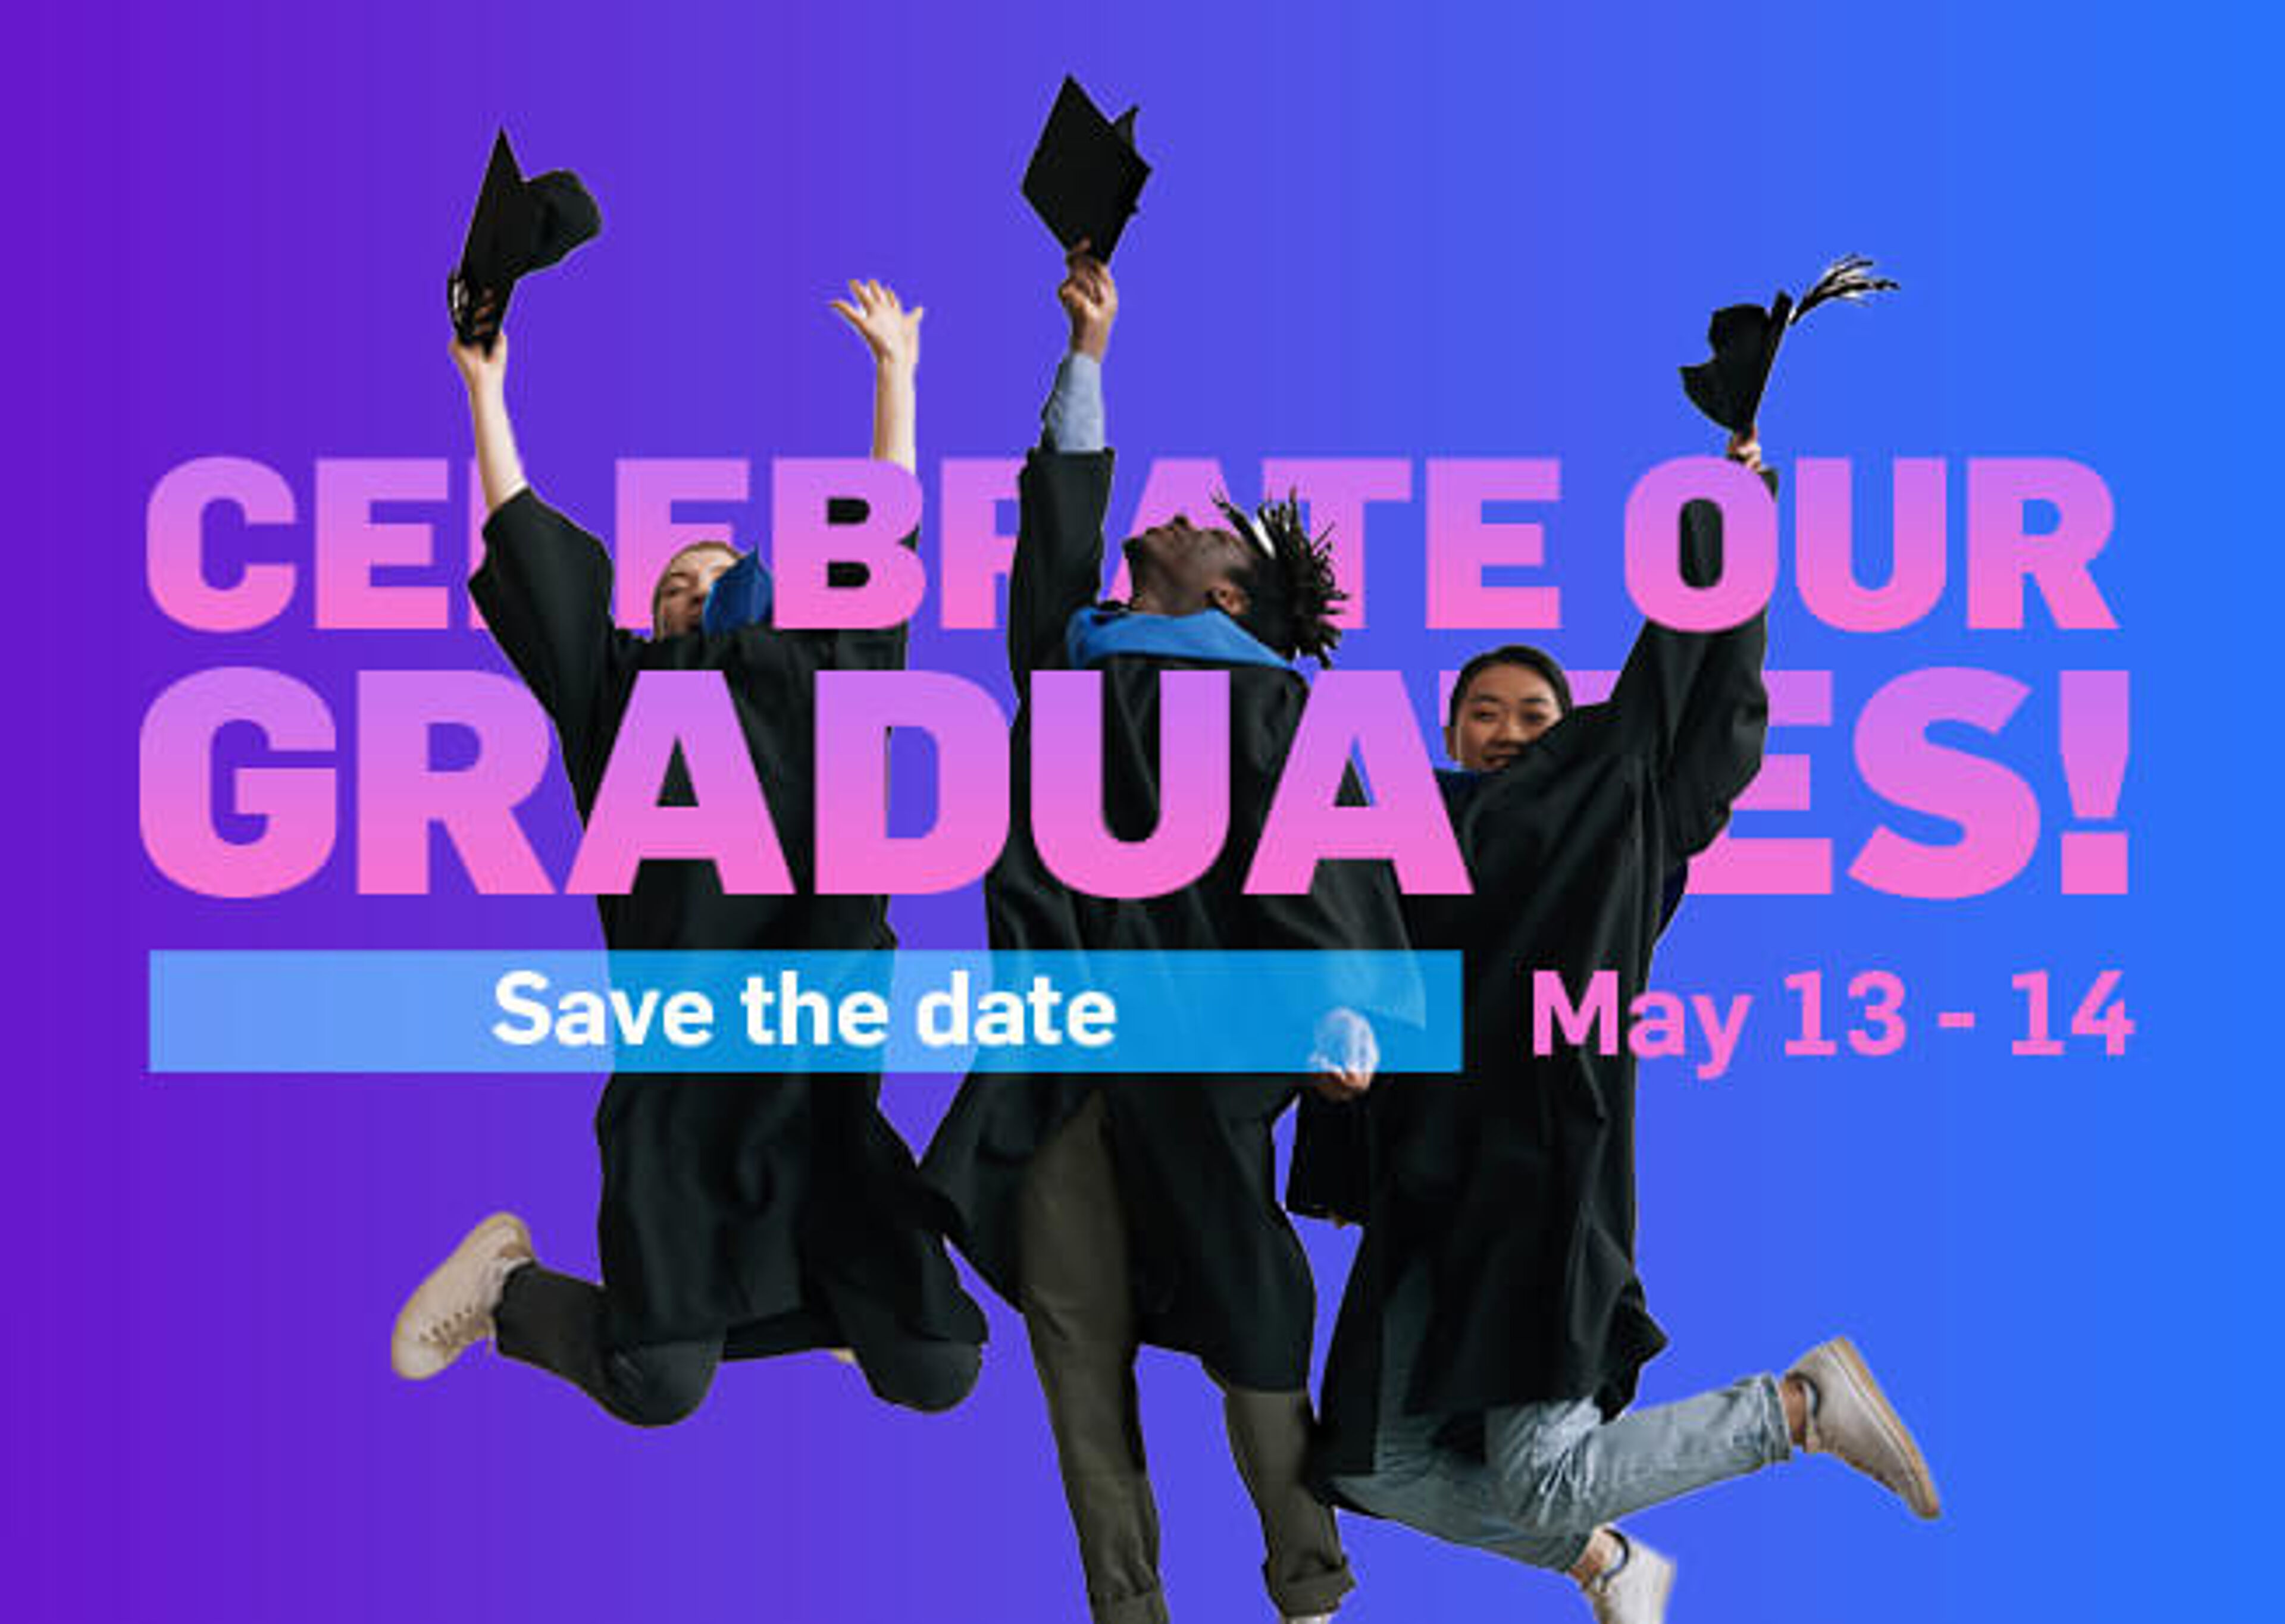 A vibrant graphic with joyful graduates in caps and gowns mid-air, with text "Celebrate our Graduates! Save the date May 13 - 14" on a purple background.